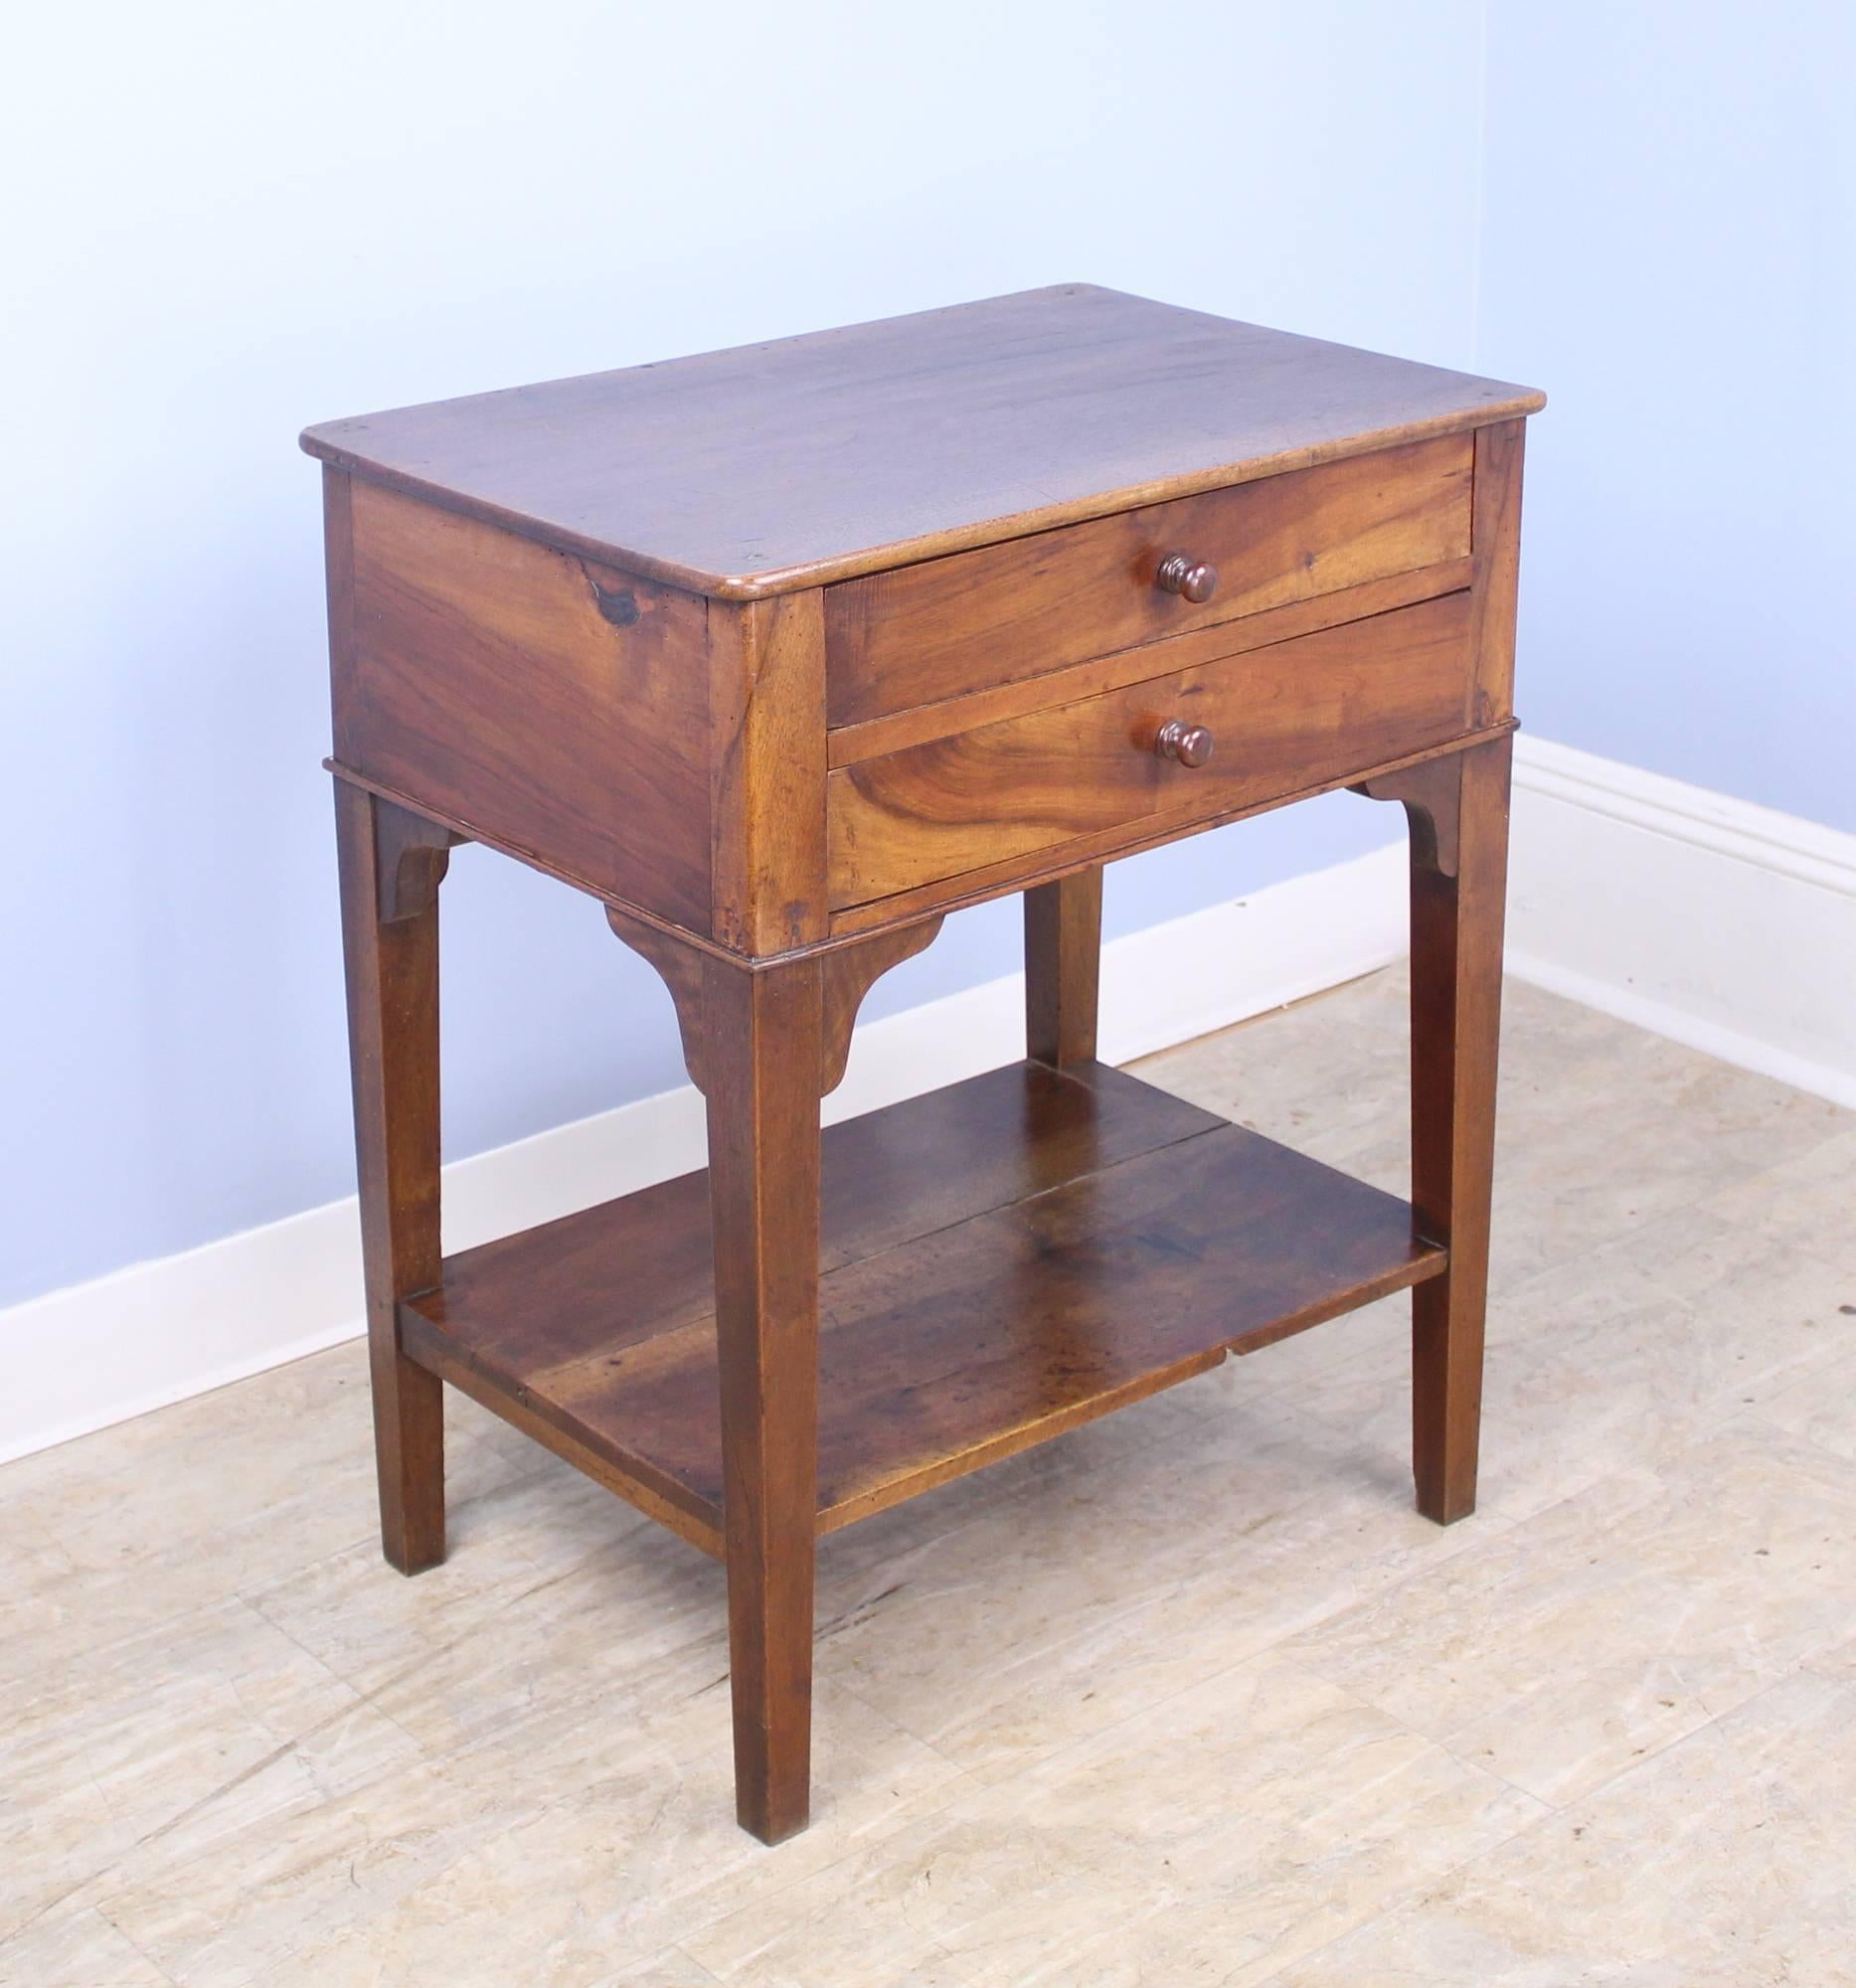 A highly functional two-drawer walnut side table with lower shelf. Beautiful walnut grain and lovely patina. Would make a nice lamp or occasional table, or a single nightstand.